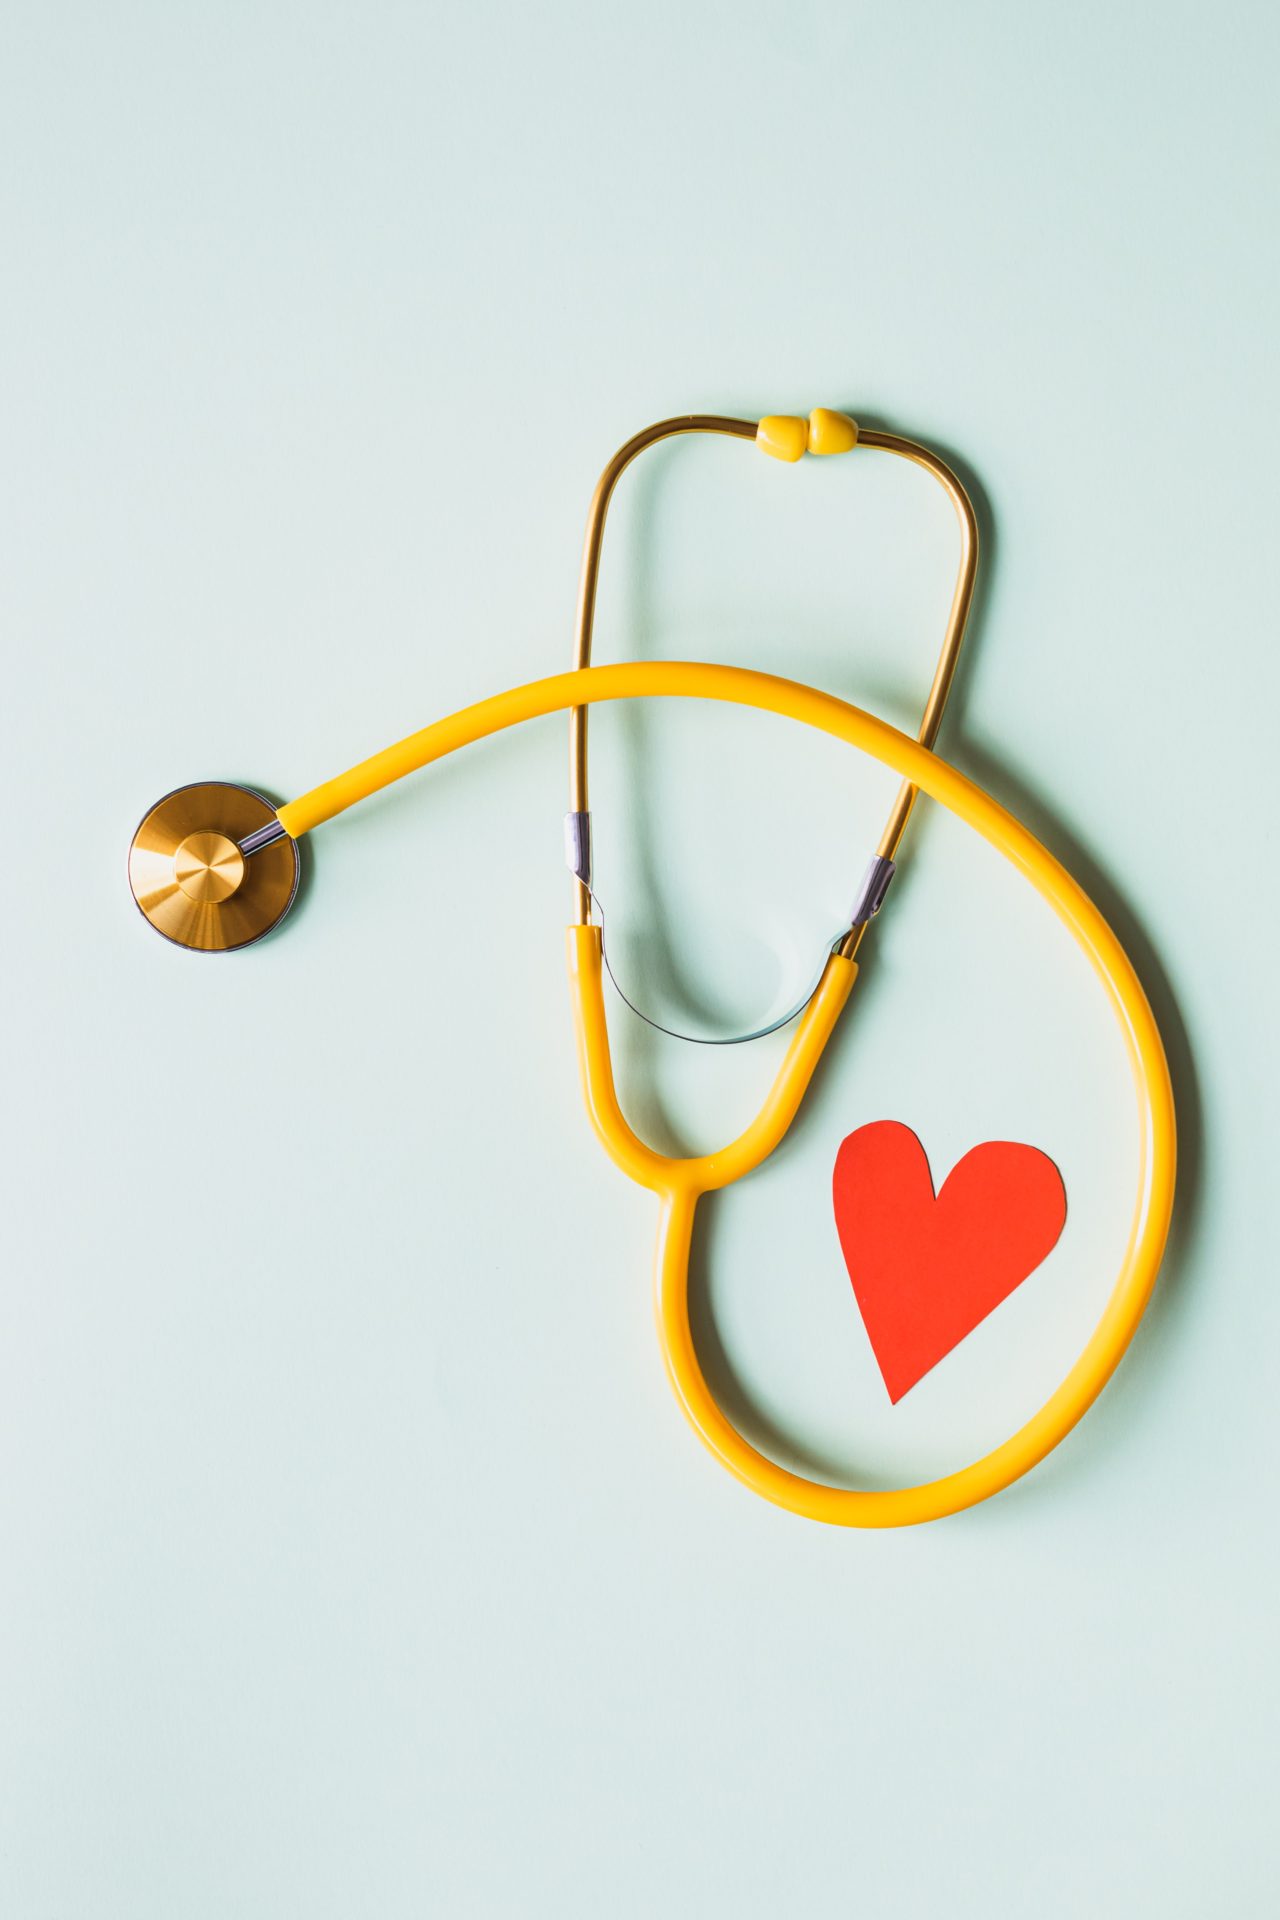 Stethoscope with red heart